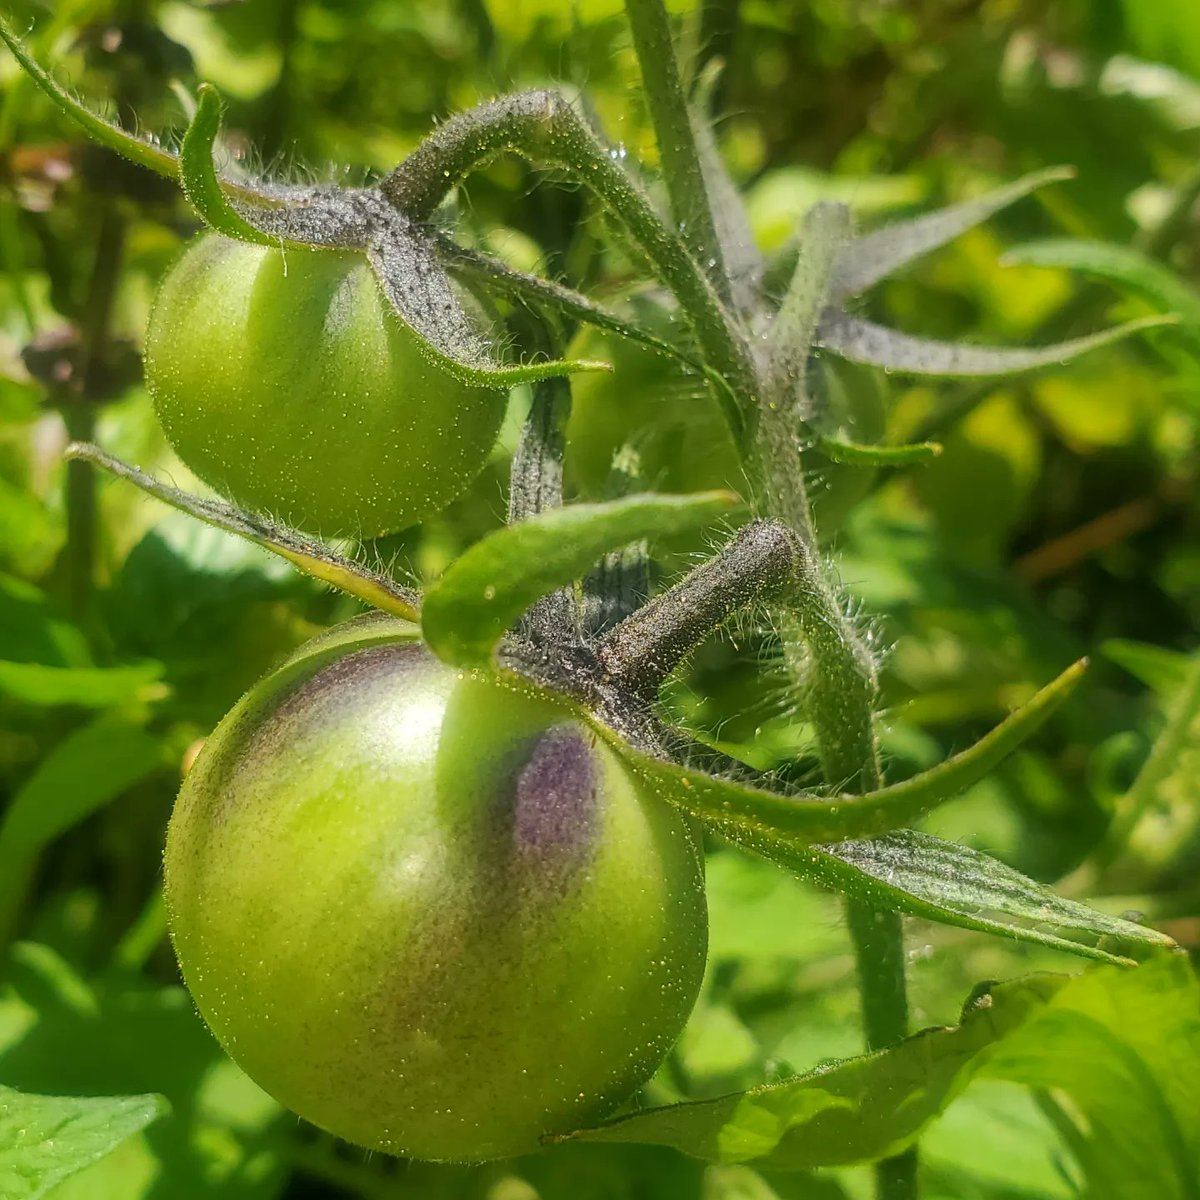 Gardeners what's your favorite thing to grow? 

etsy.com/shop/DulcedeLa…

#growyourownfood #etsy #mondaythoughts #etsystore #GardeningX #GardeningTwitter #smallgarden #variety #favorite #fruits #vegetables #summer #fall #FoodSecurity #tomatoes #heirloomtomatoes #heirloomvegetables